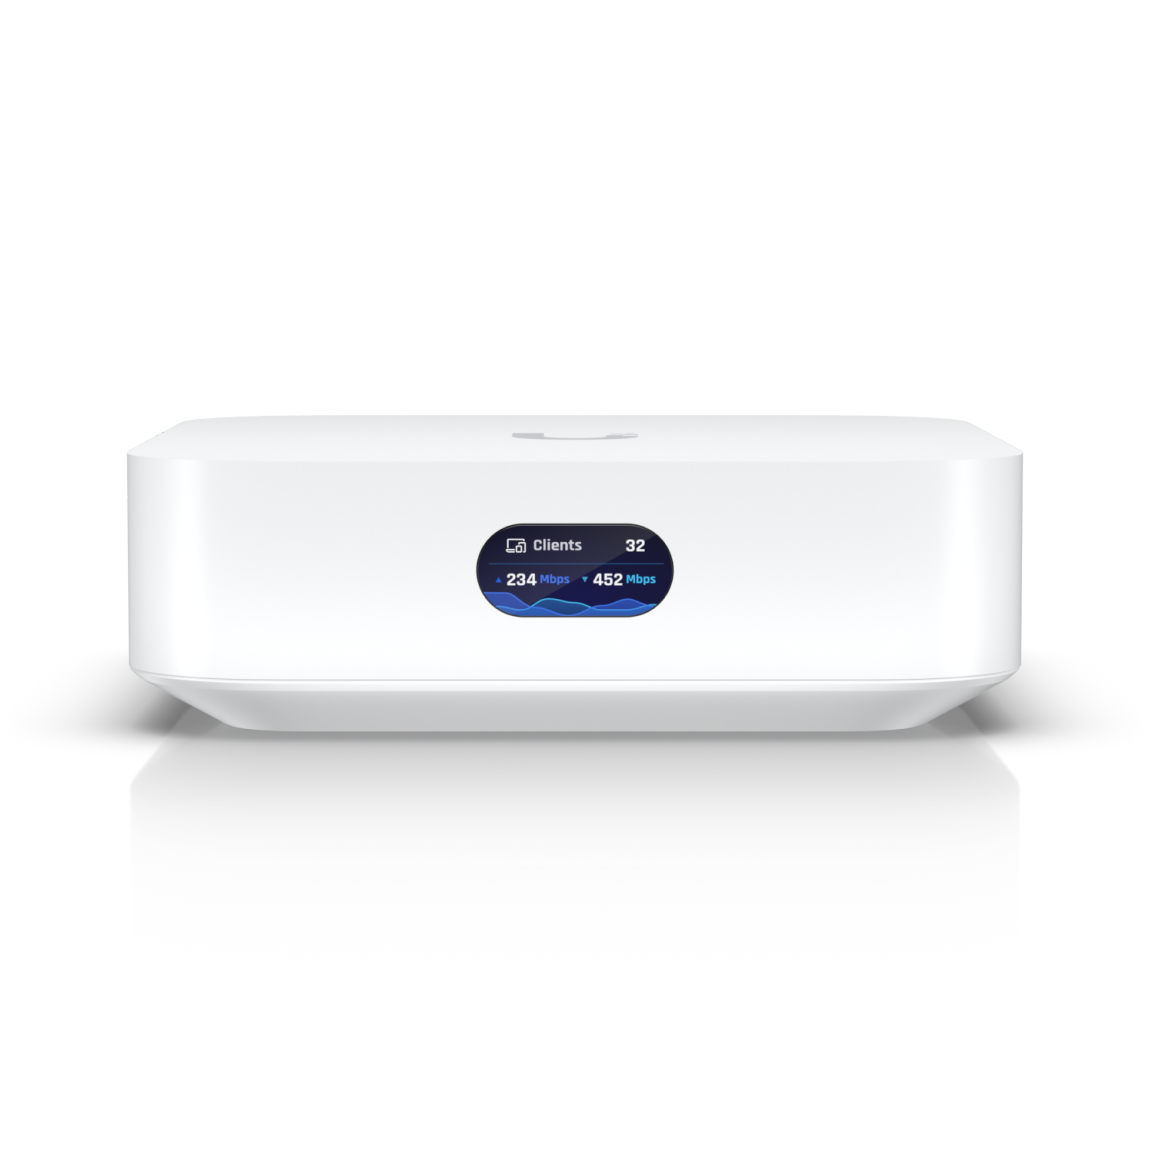 UniFi Express: The Game-Changer in Home & Small Business Networking! 